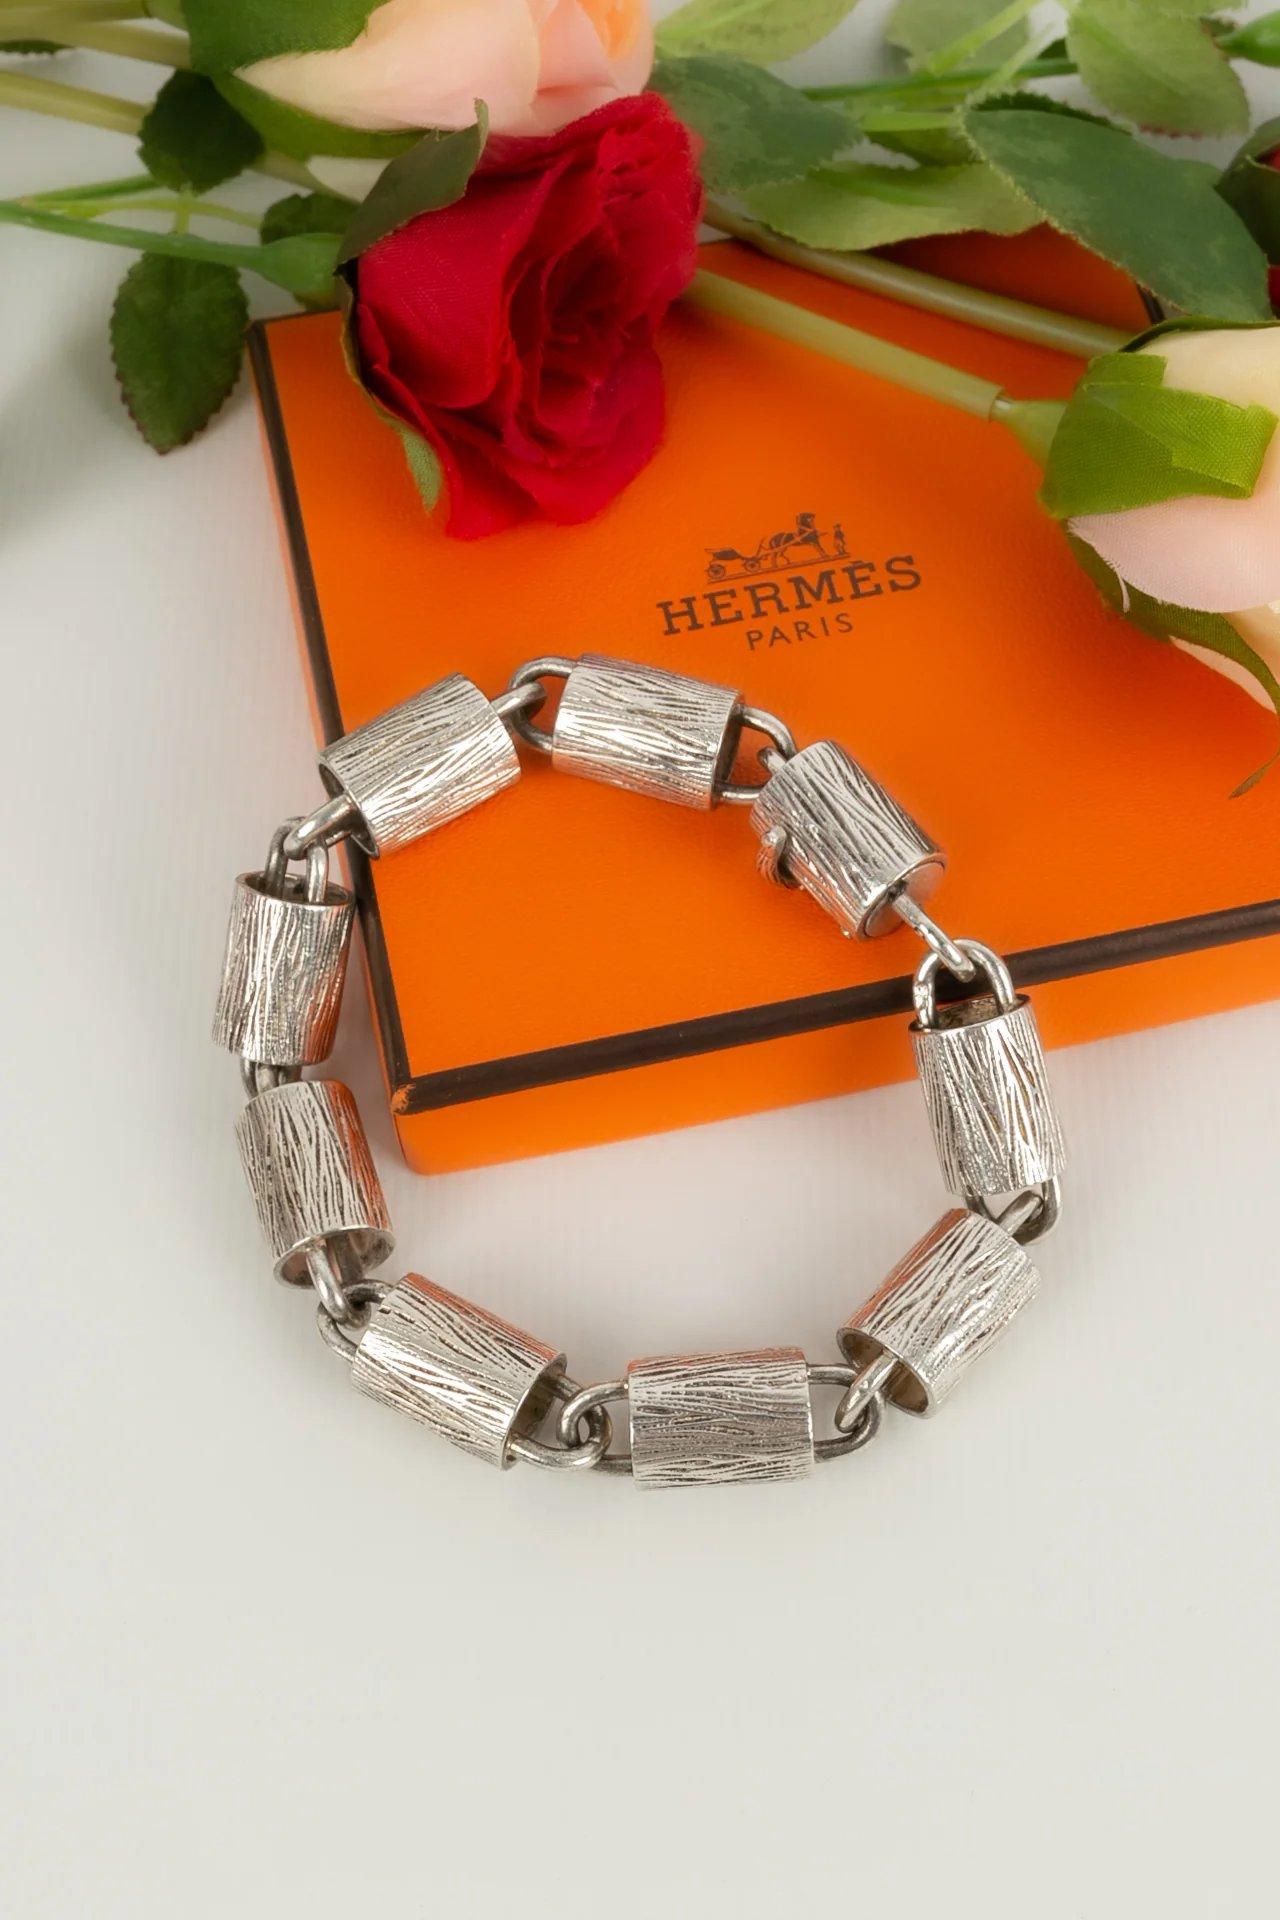 Hermès - (Made in France) Rare silver bracelet. Collector's model.

Additional information:
Dimensions: 22 L cm

Condition: 
Very good condition

Seller Ref number: BRA35